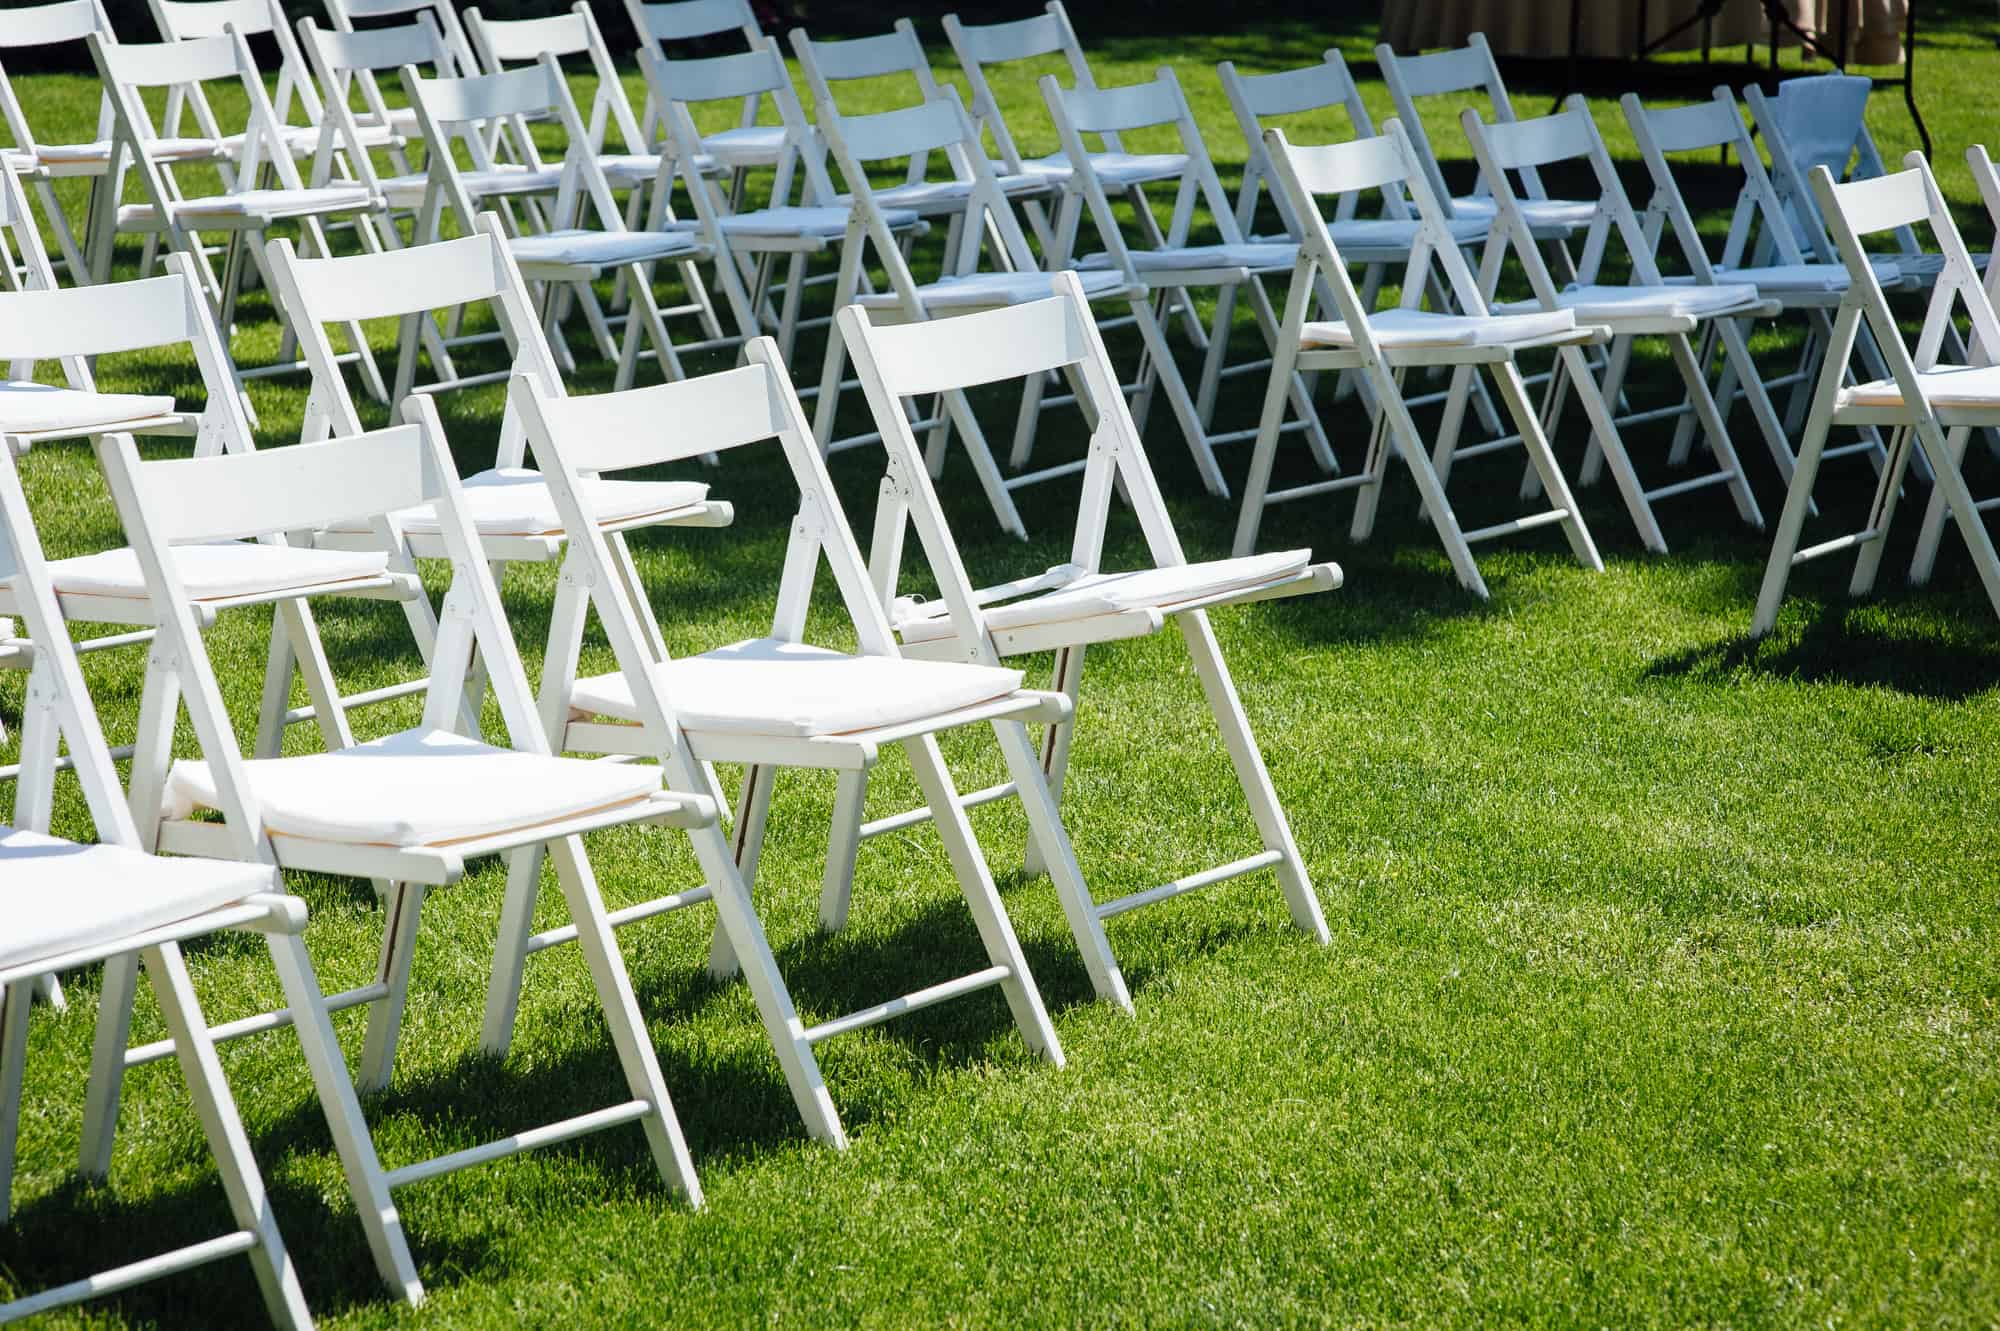 How to Stop Outdoor Chairs From Sinking in the Grass